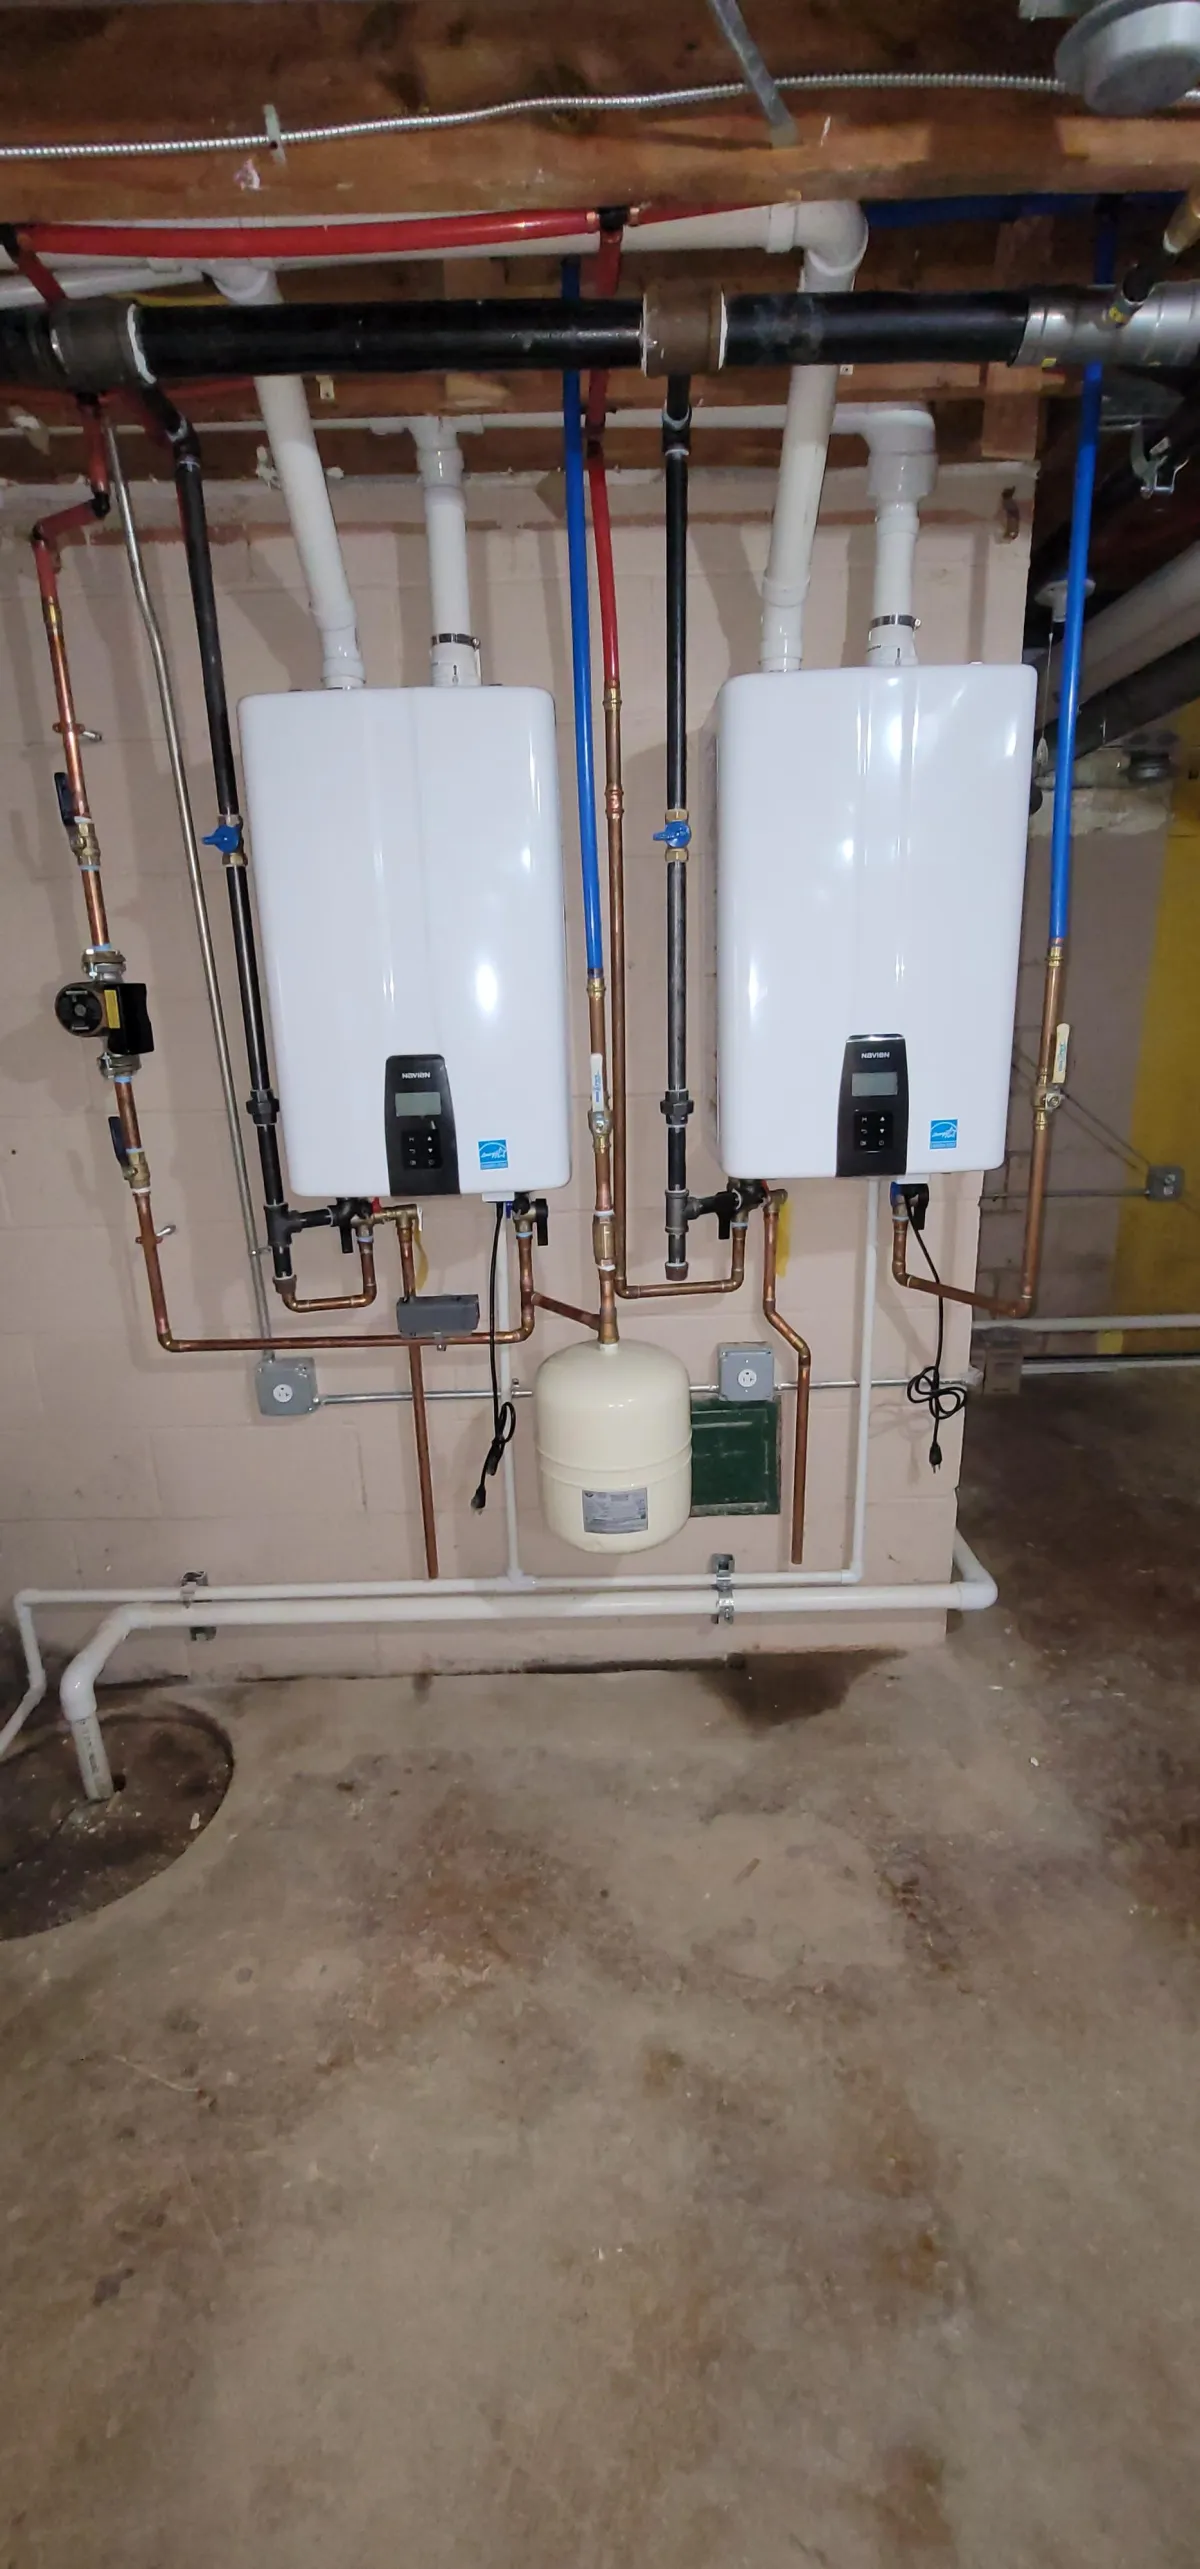 A professionally installed tankless water heater by Hatz Plumbing, showcasing the compact design and advanced technology that provides endless hot water with energy efficiency.